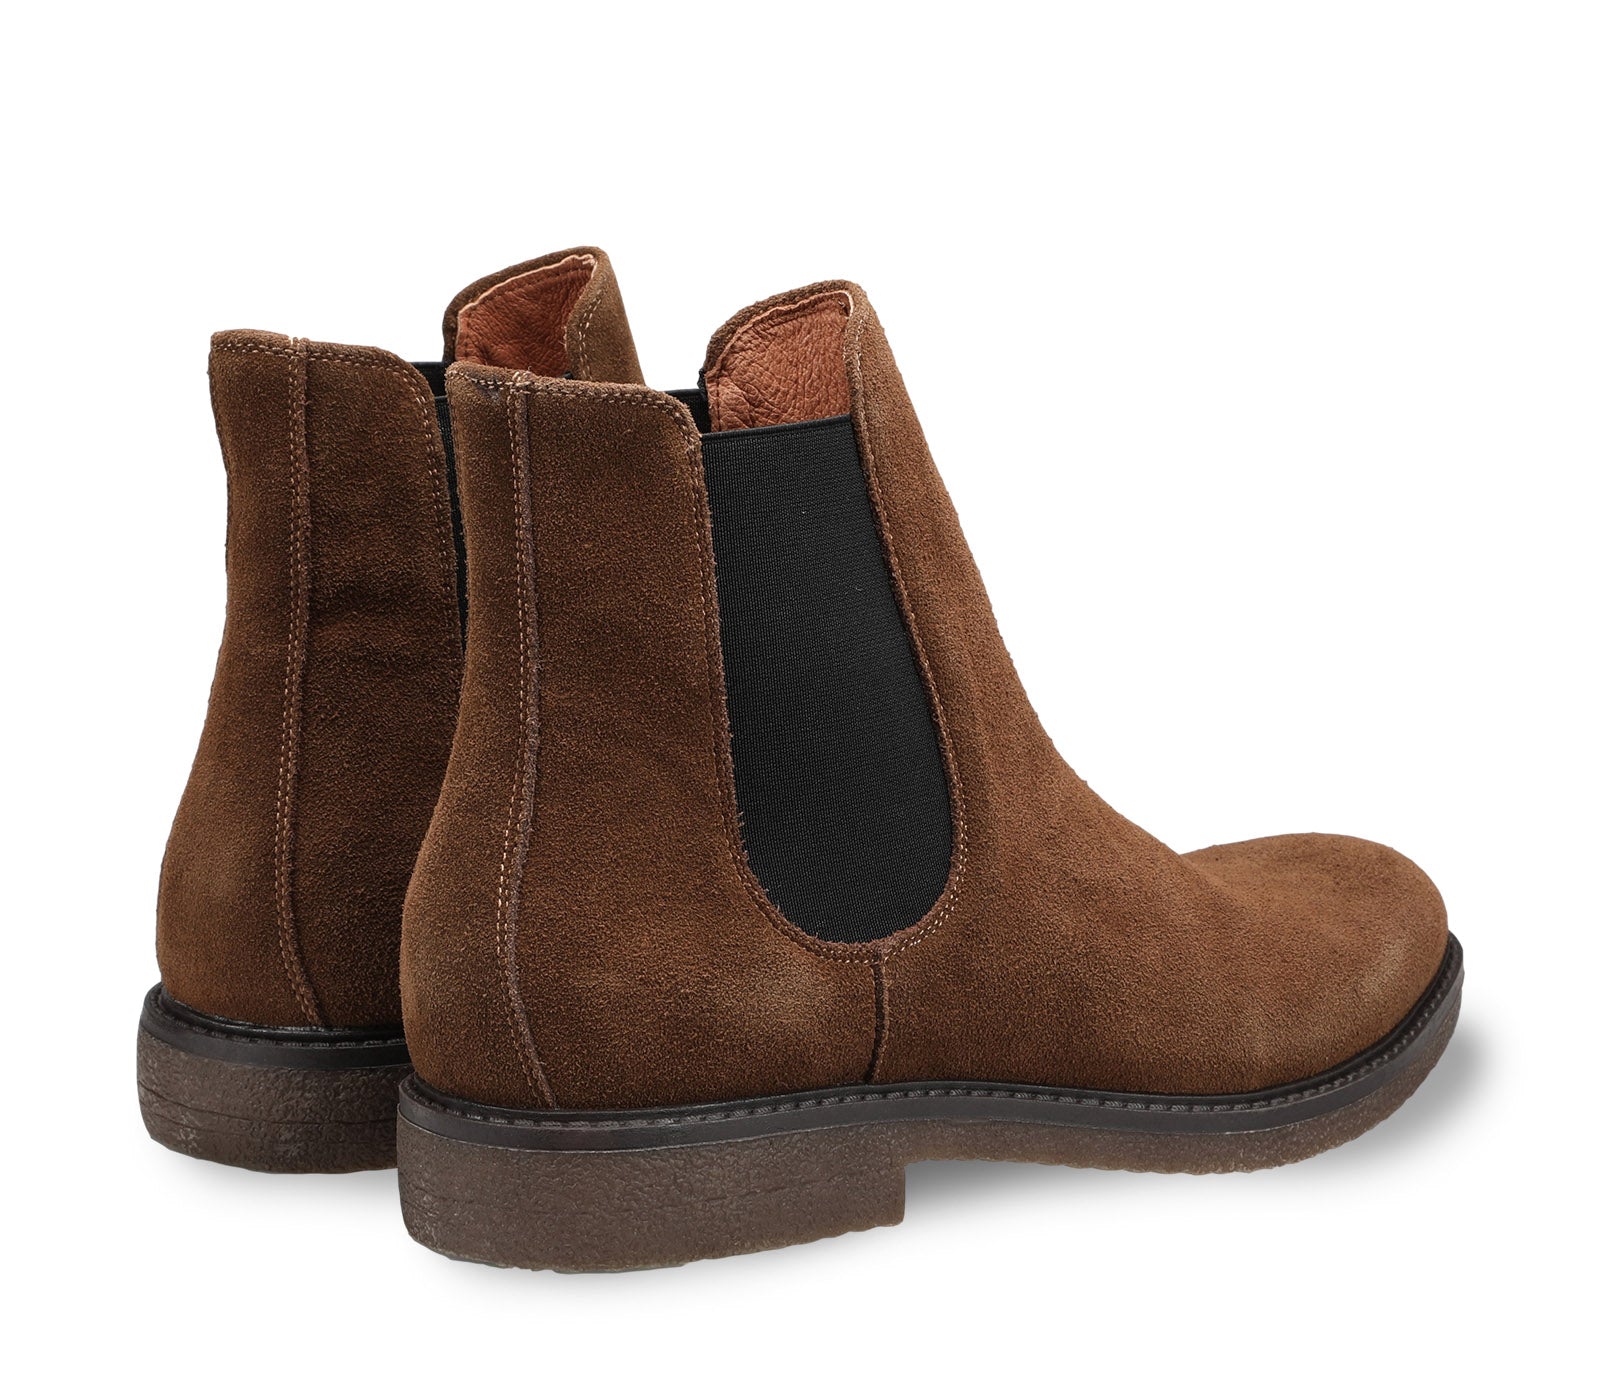 Men's Tobacco-colored Chelsea Ankle Boots in Suede Leather with Elasticized Inserts